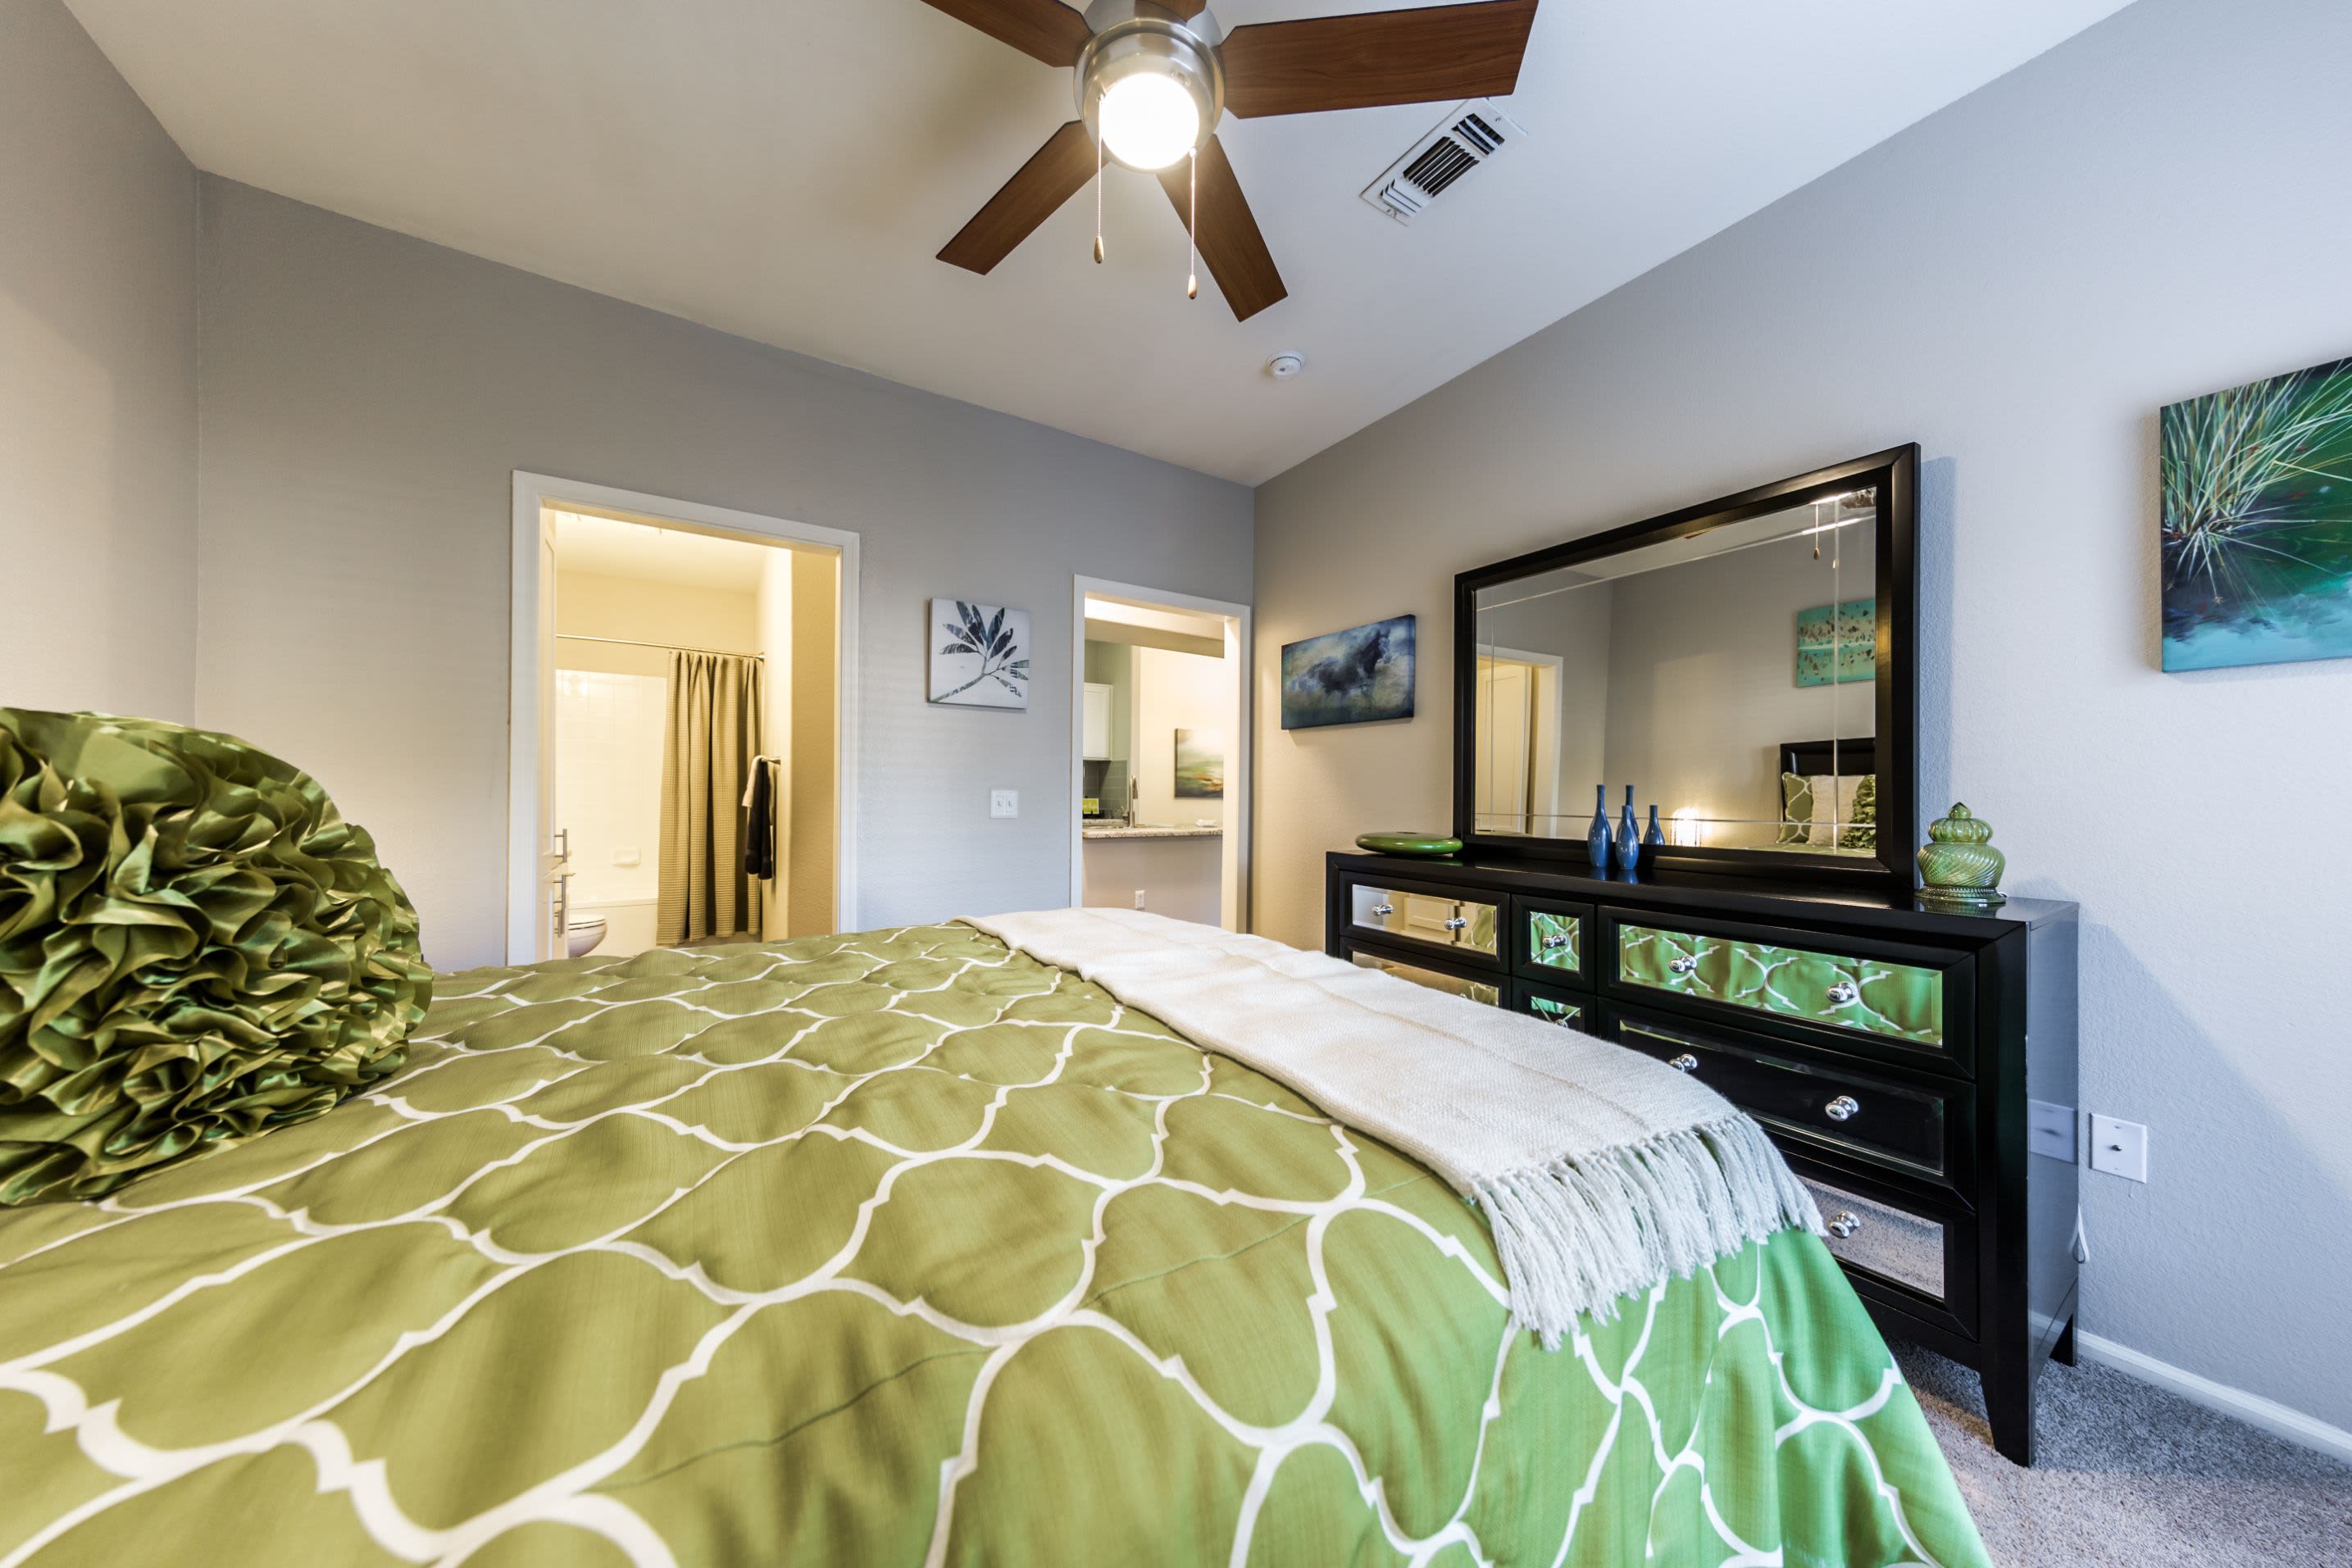 Bedroom with ceiling fan at Marquis at Arrowhead in Peoria, Arizona